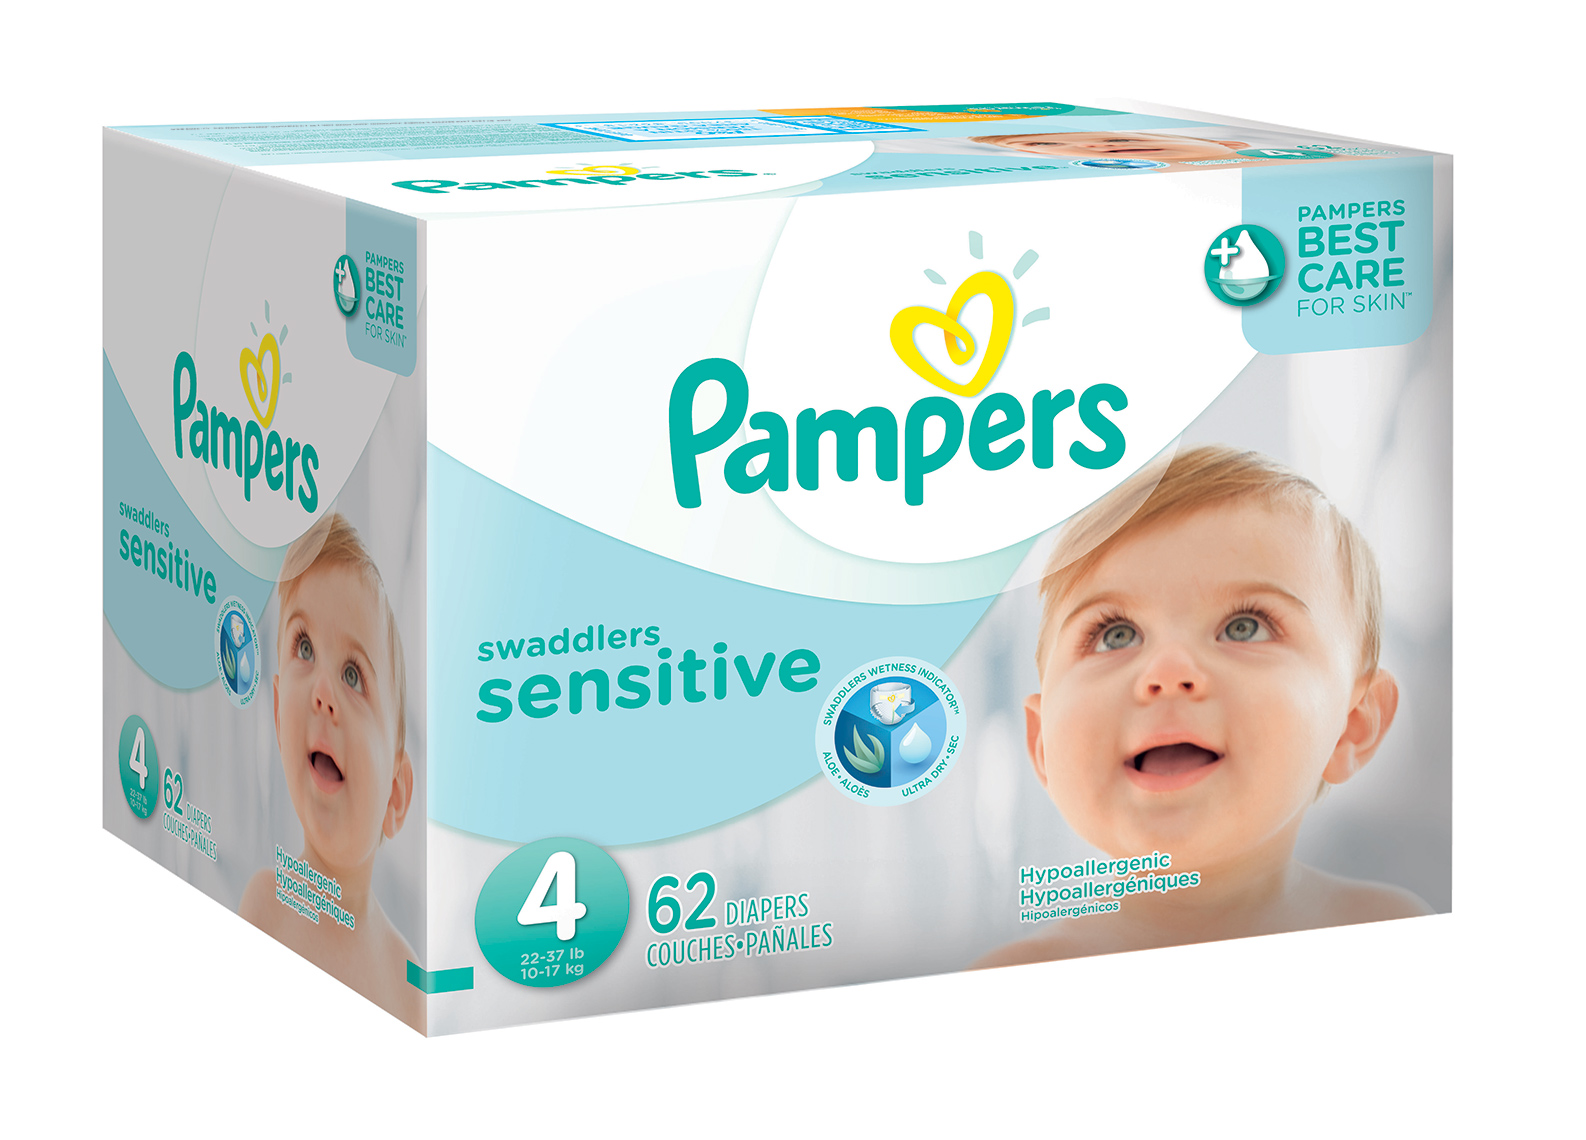 Pampers Package box